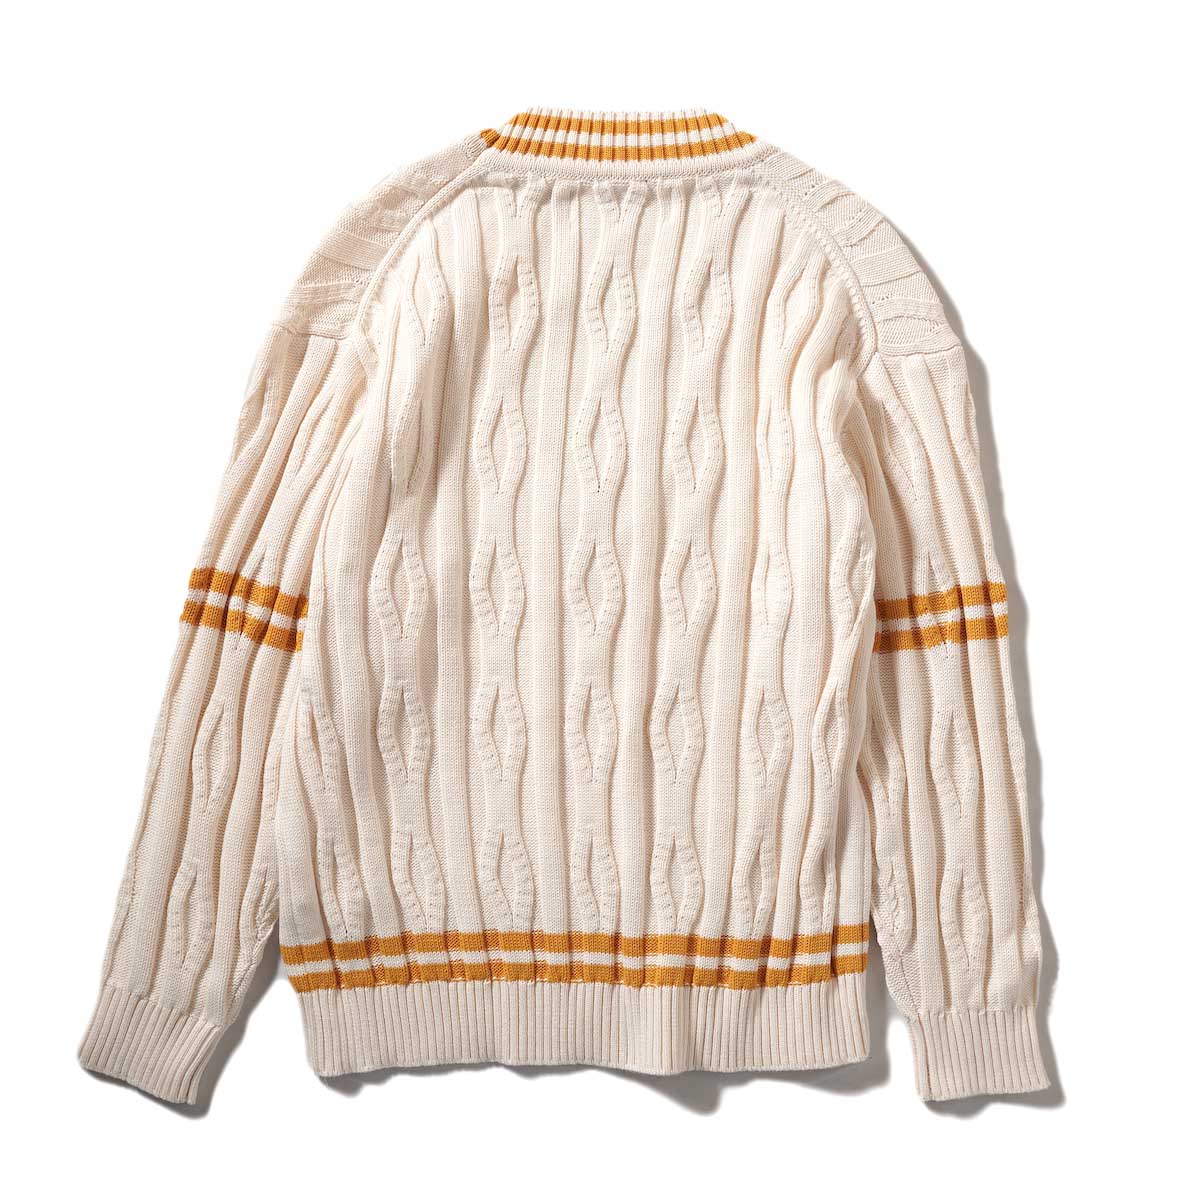 JANESMITH  / CHILDEN KNIT (Natural) 背面